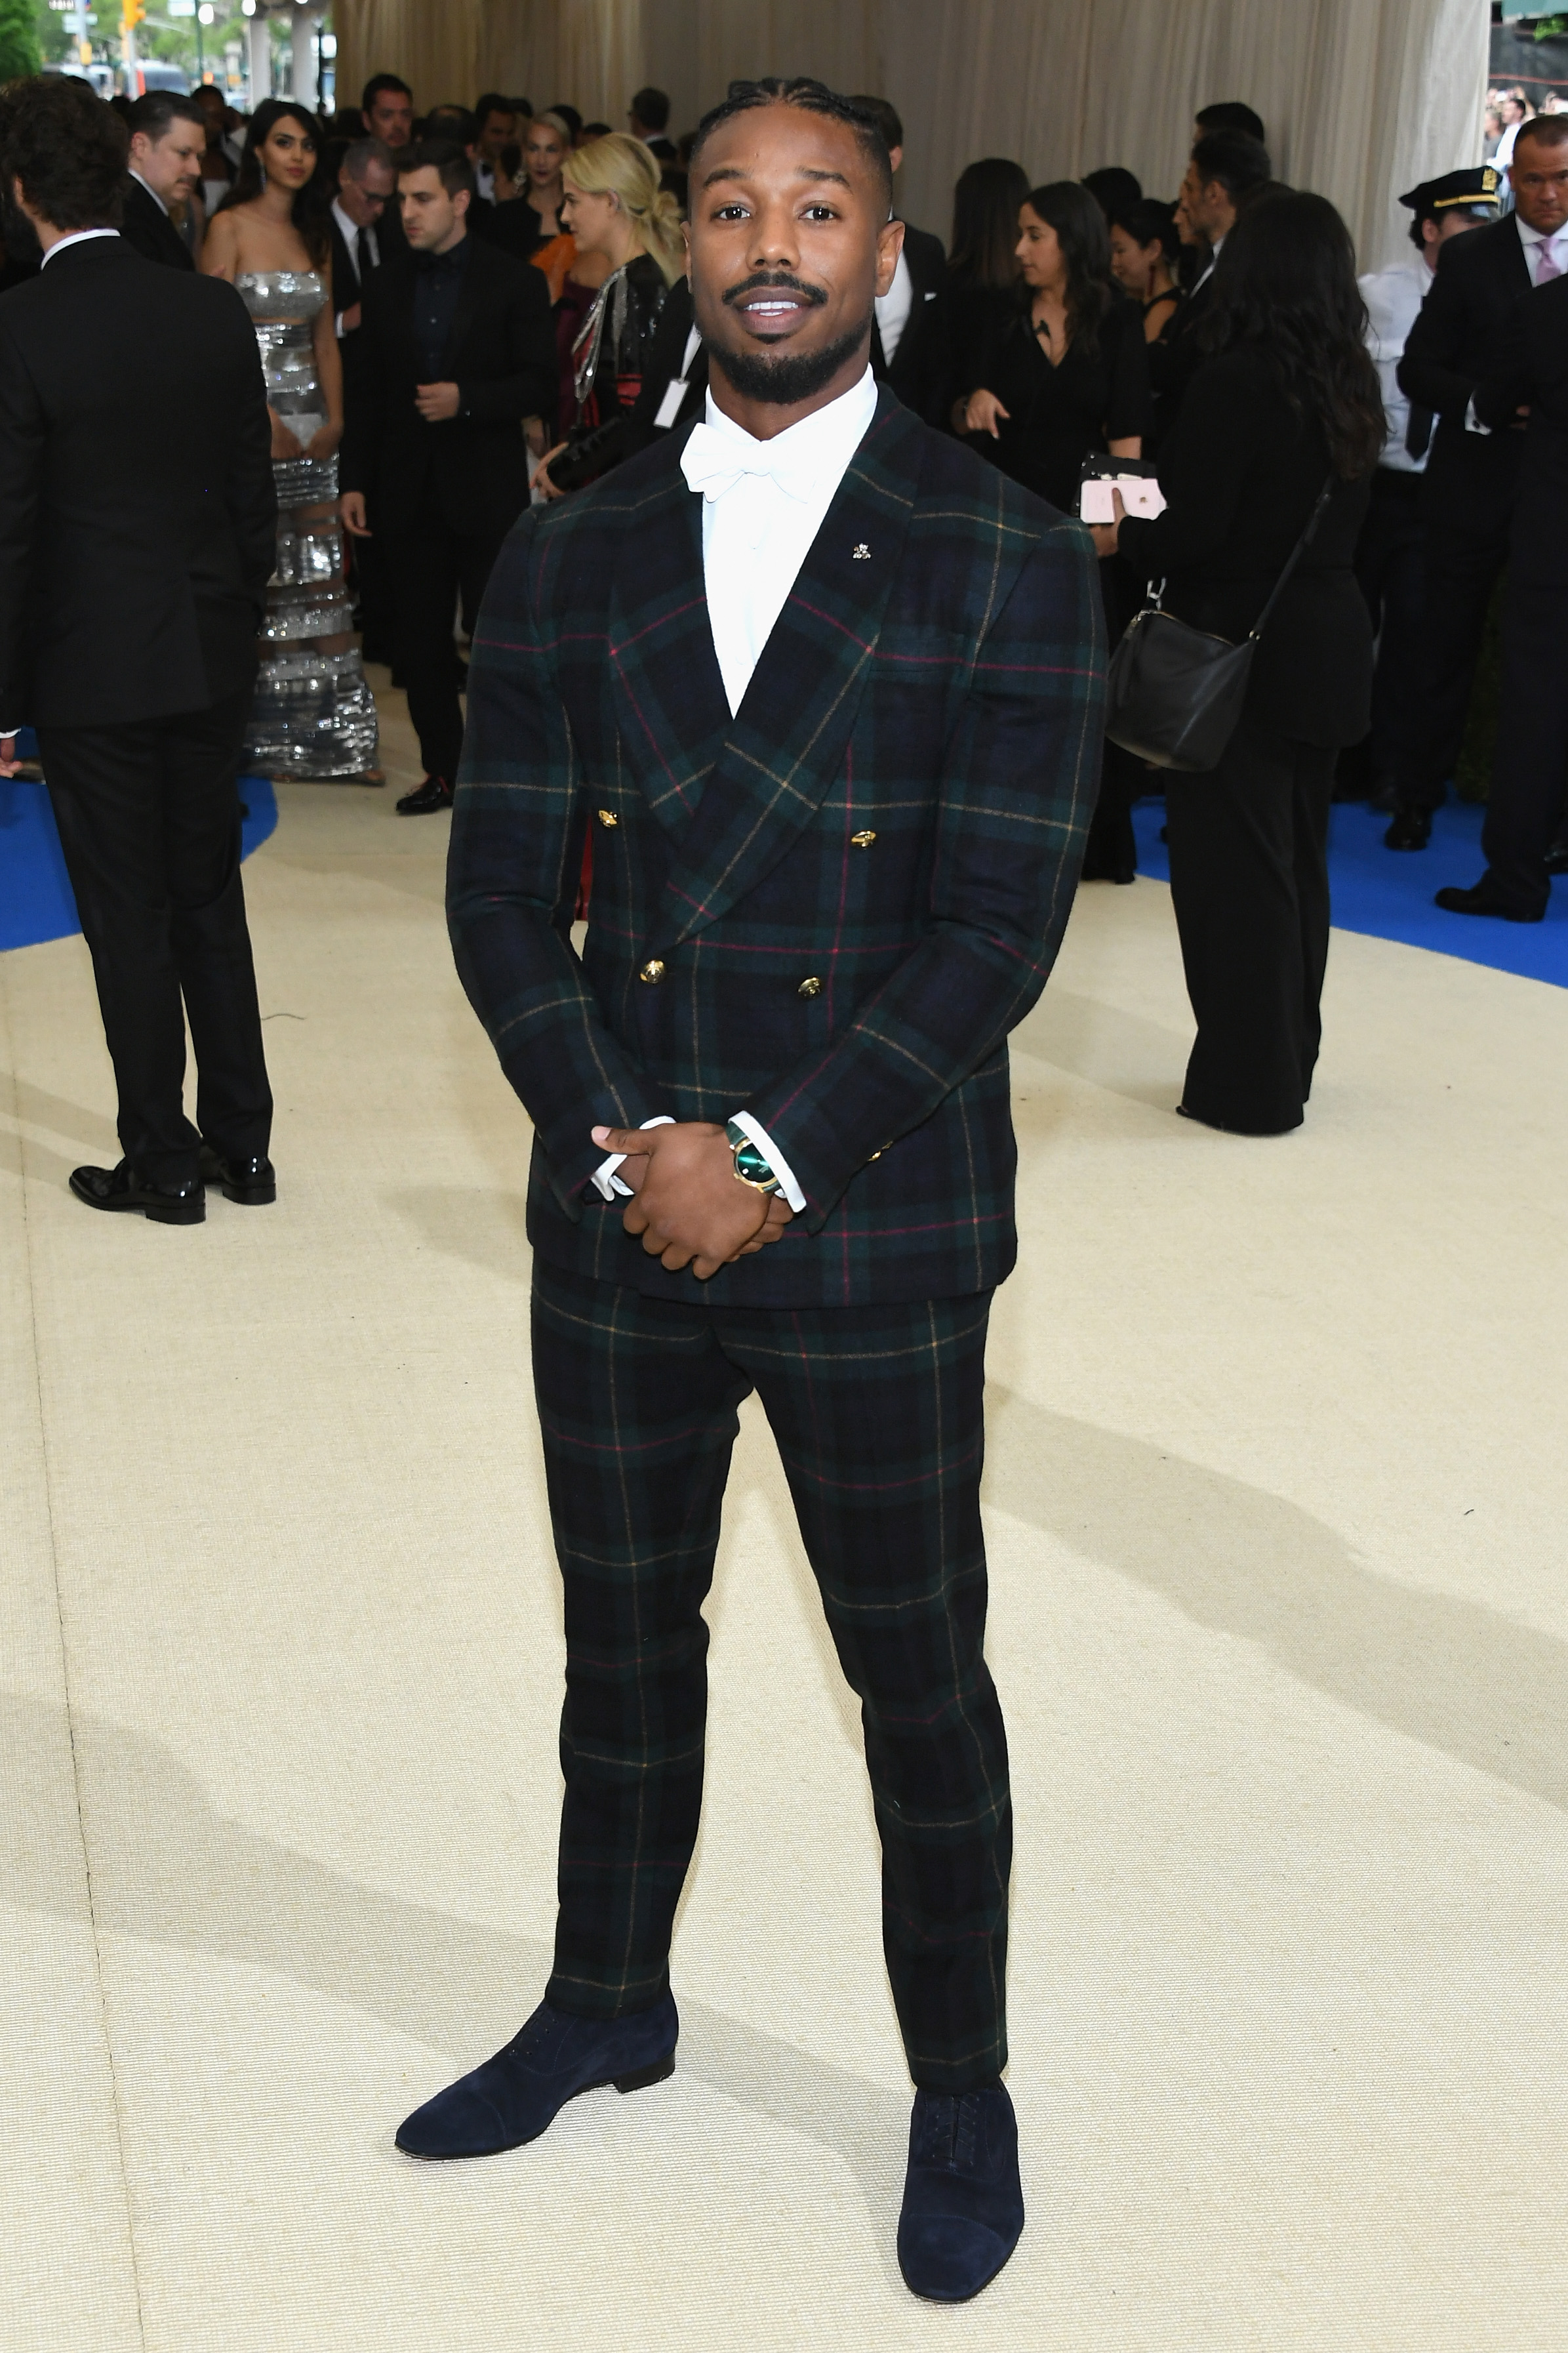 Michael B. Jordan wears Piaget jewellery at the Metropolitan Museum of Art’s annual Costume Institute Gala (Photo by Dia Dipasupil/Getty Images For Entertainment Weekly)